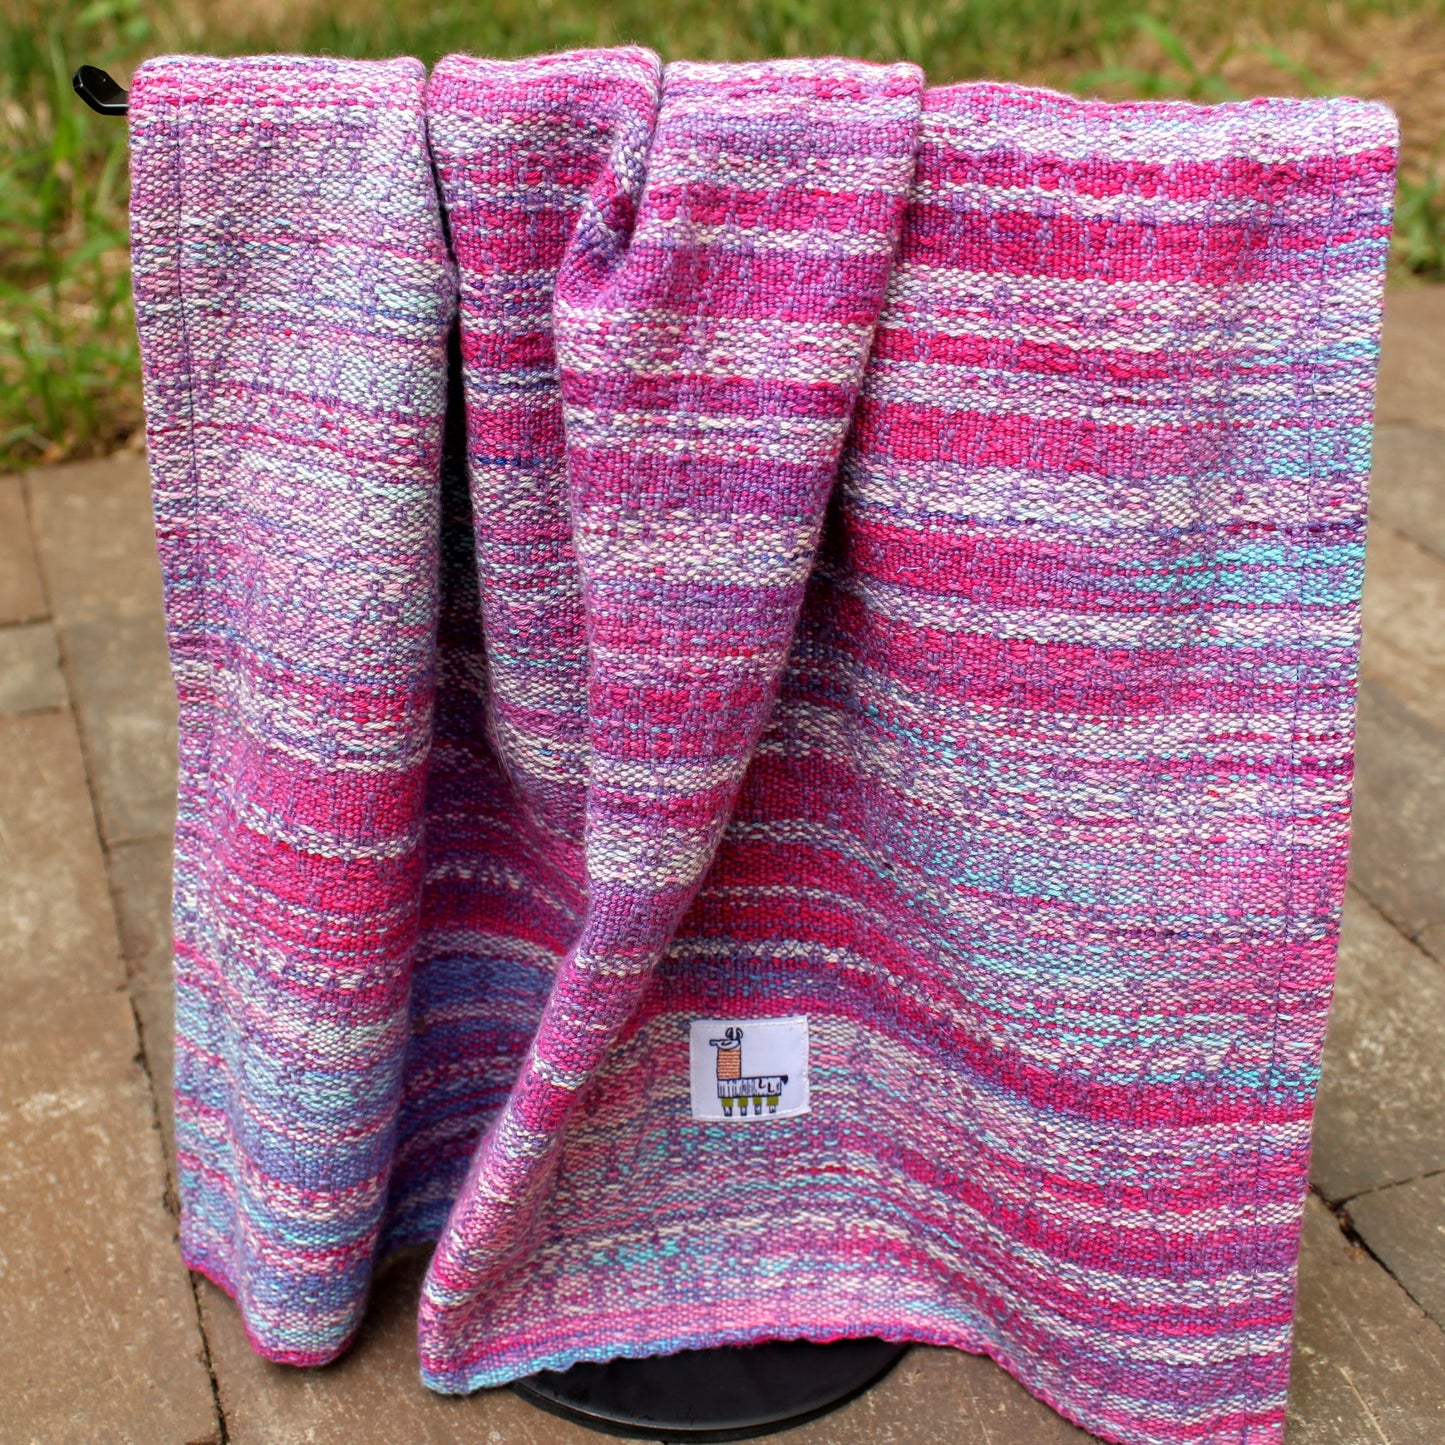 Handwoven Towel - "Cotton Candy"